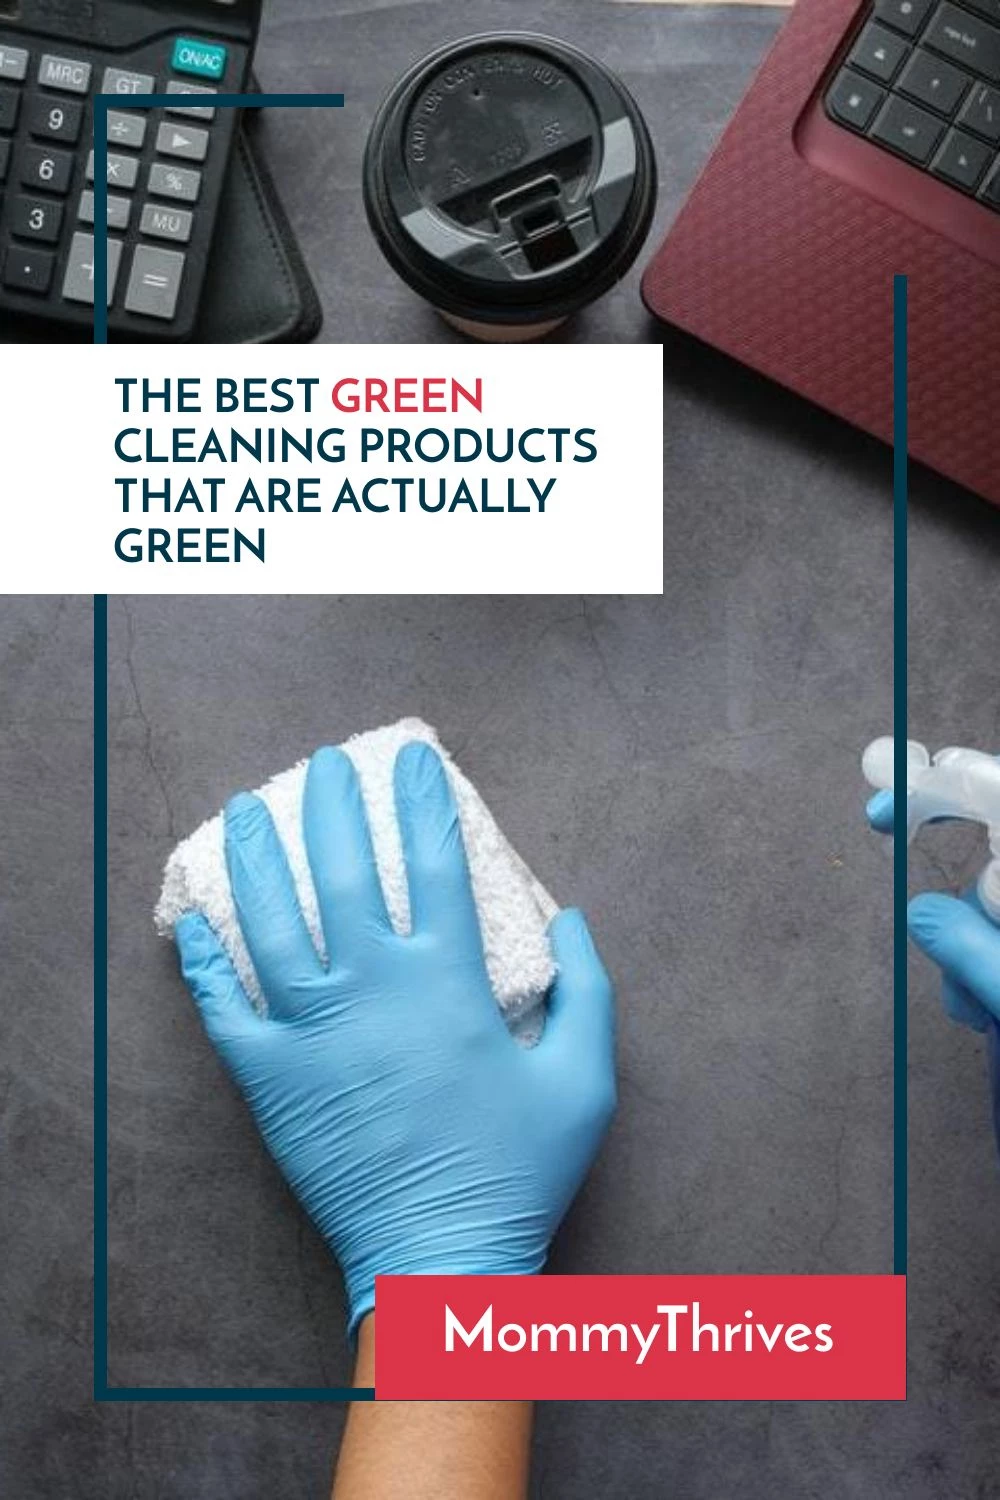 Best Green Cleaning Products For The Home - Green Cleaning Products List - Cleaning Tips and Products